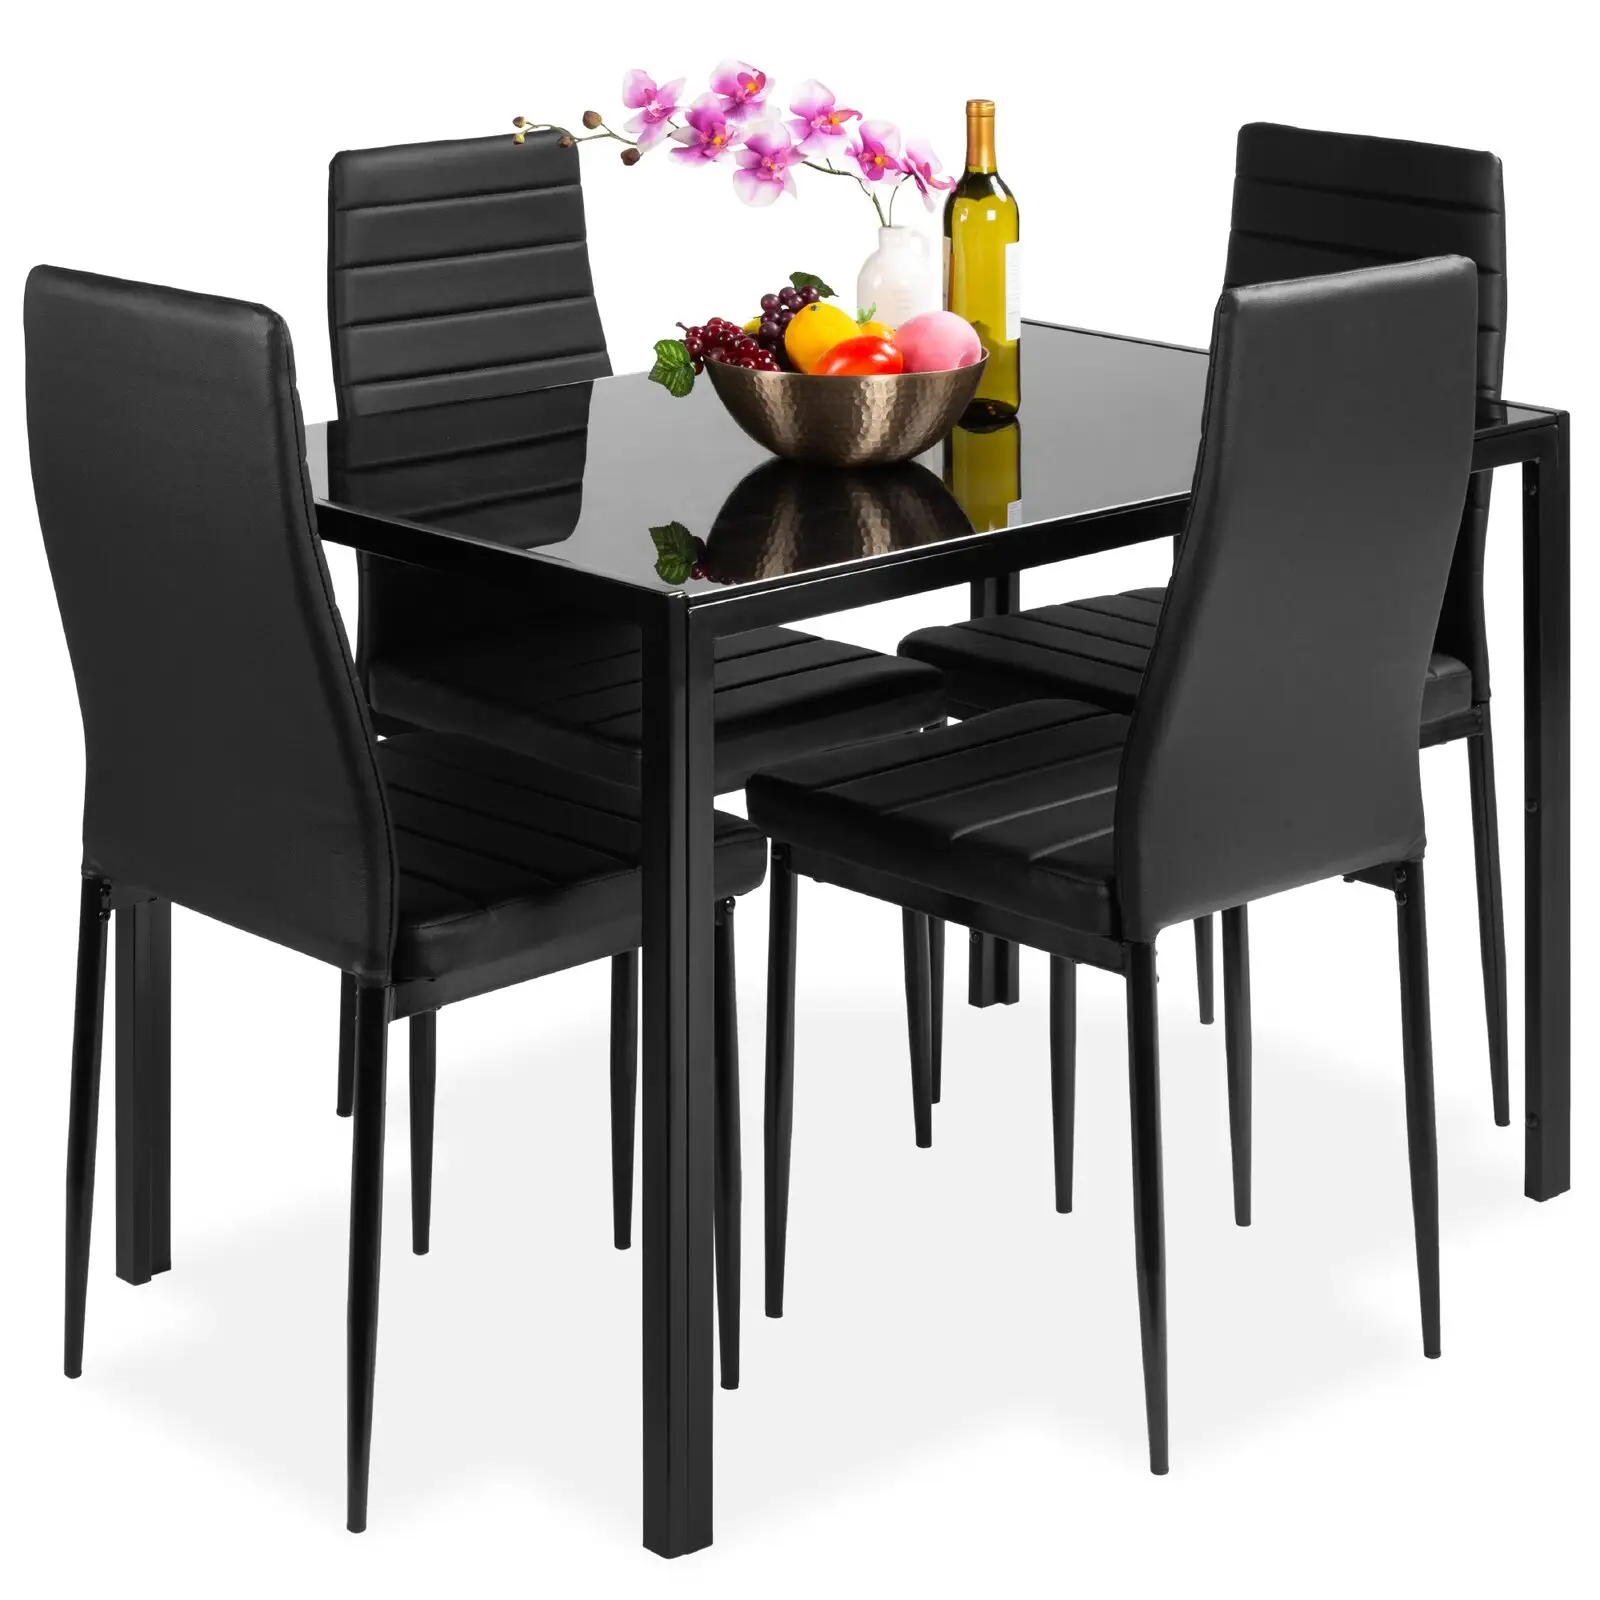 Modern Black Glass Dining Table With 4 Chairs Kitchen Room Dining Table Set